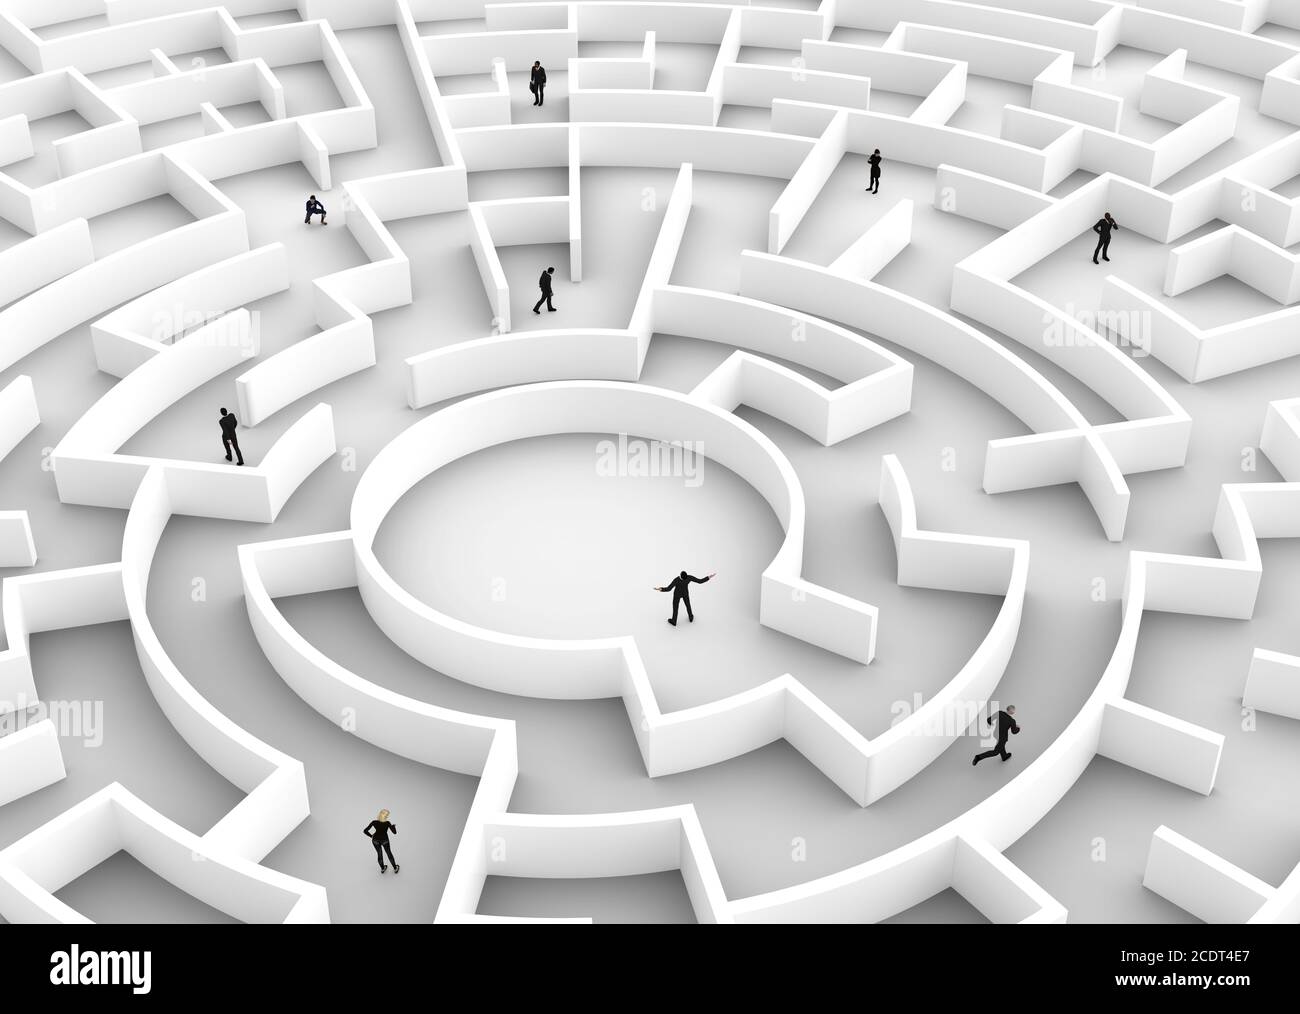 Business people competition - finding a solution of the maze., one winner. Stock Photo